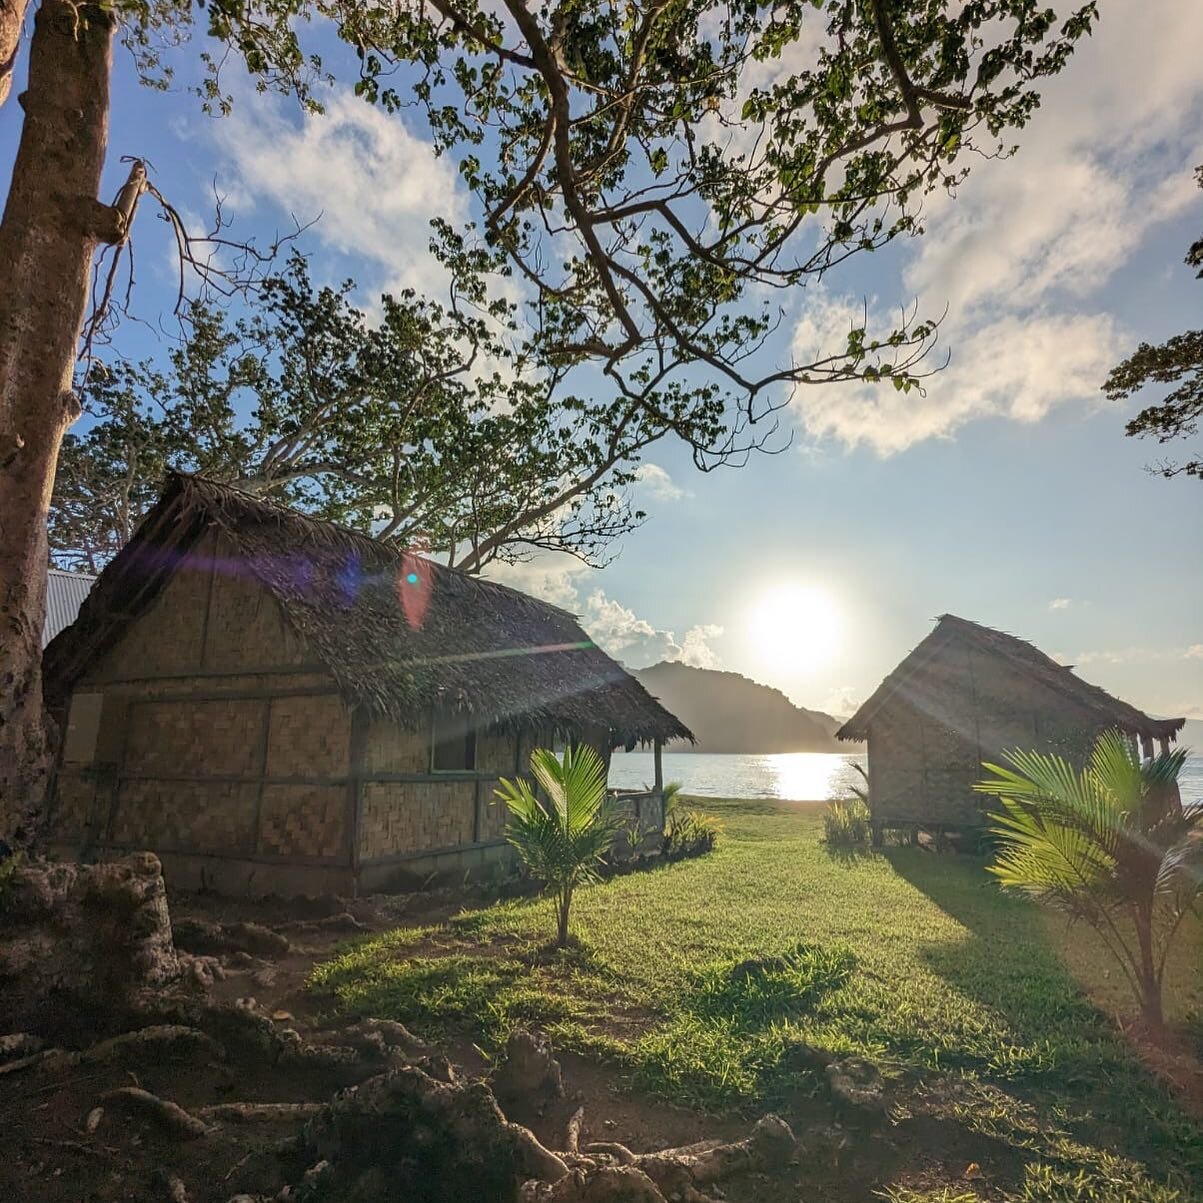 Experience nature's charm in our eco-tourism bungalows - basic yet comfortable. Crafted from local materials, they blend seamlessly with the surroundings. Equipped with 240v power outlets, fans, mosquito nets, and cozy beds. Sleep to the sound of the